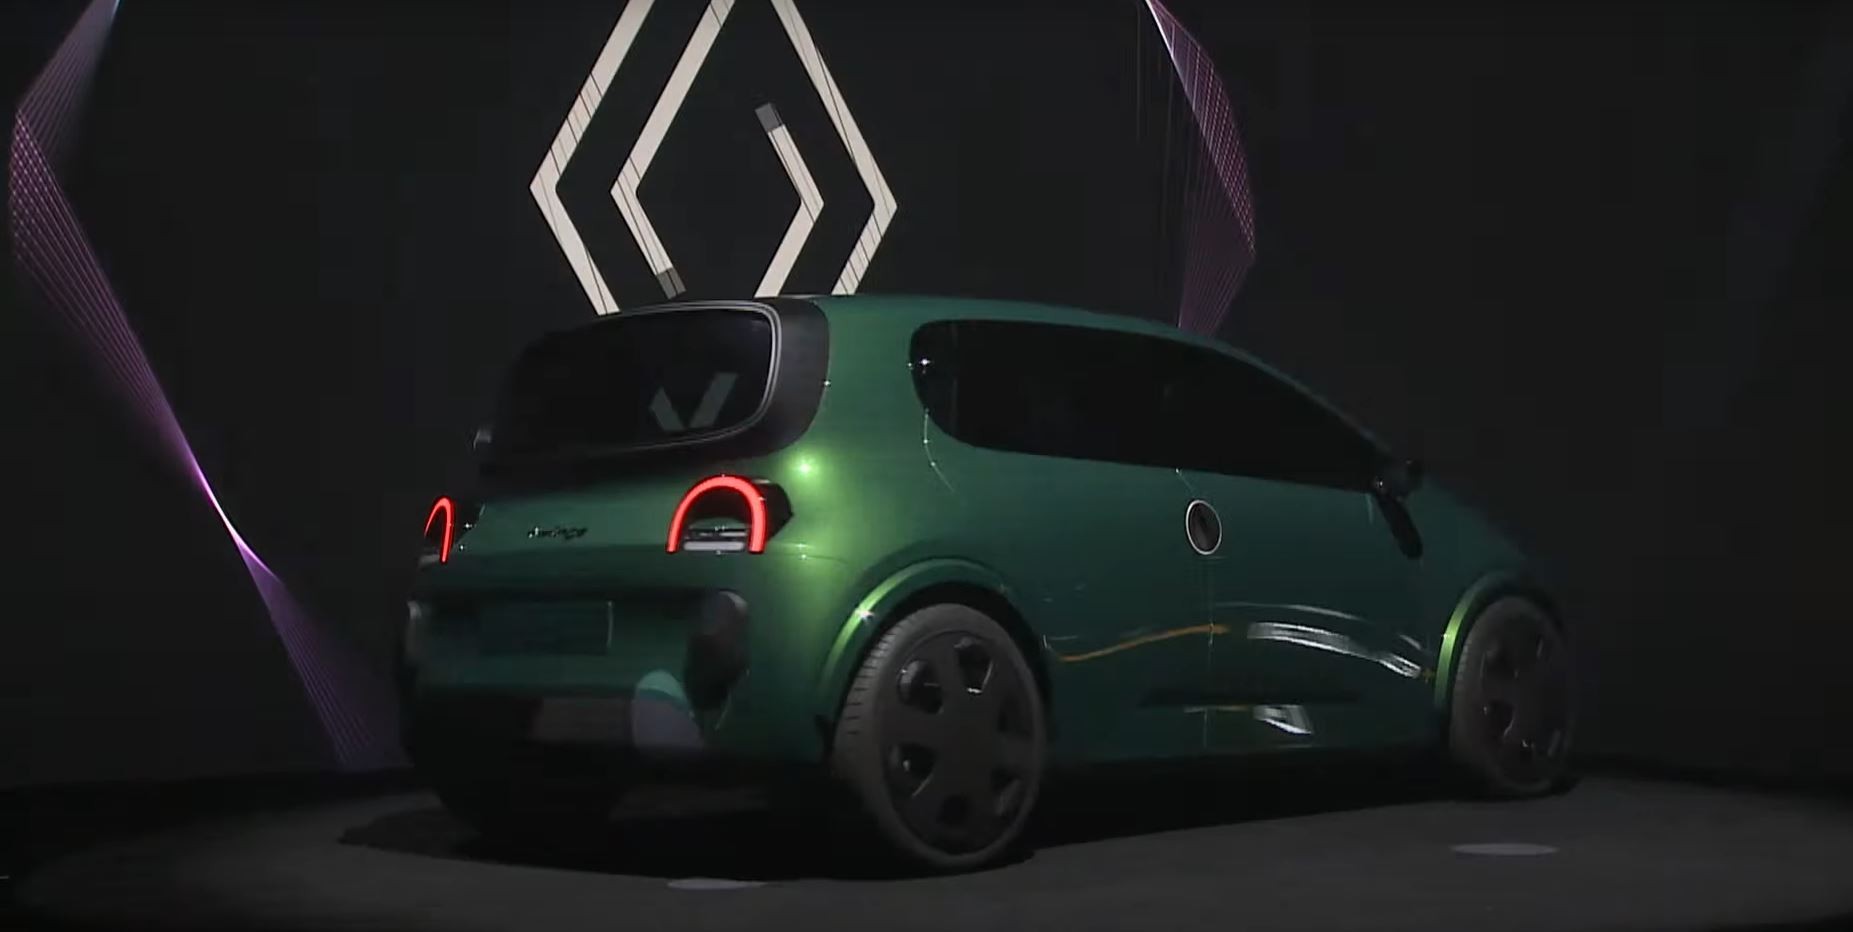 Twingo Electric: a design as exuberant as ever - Renault Group